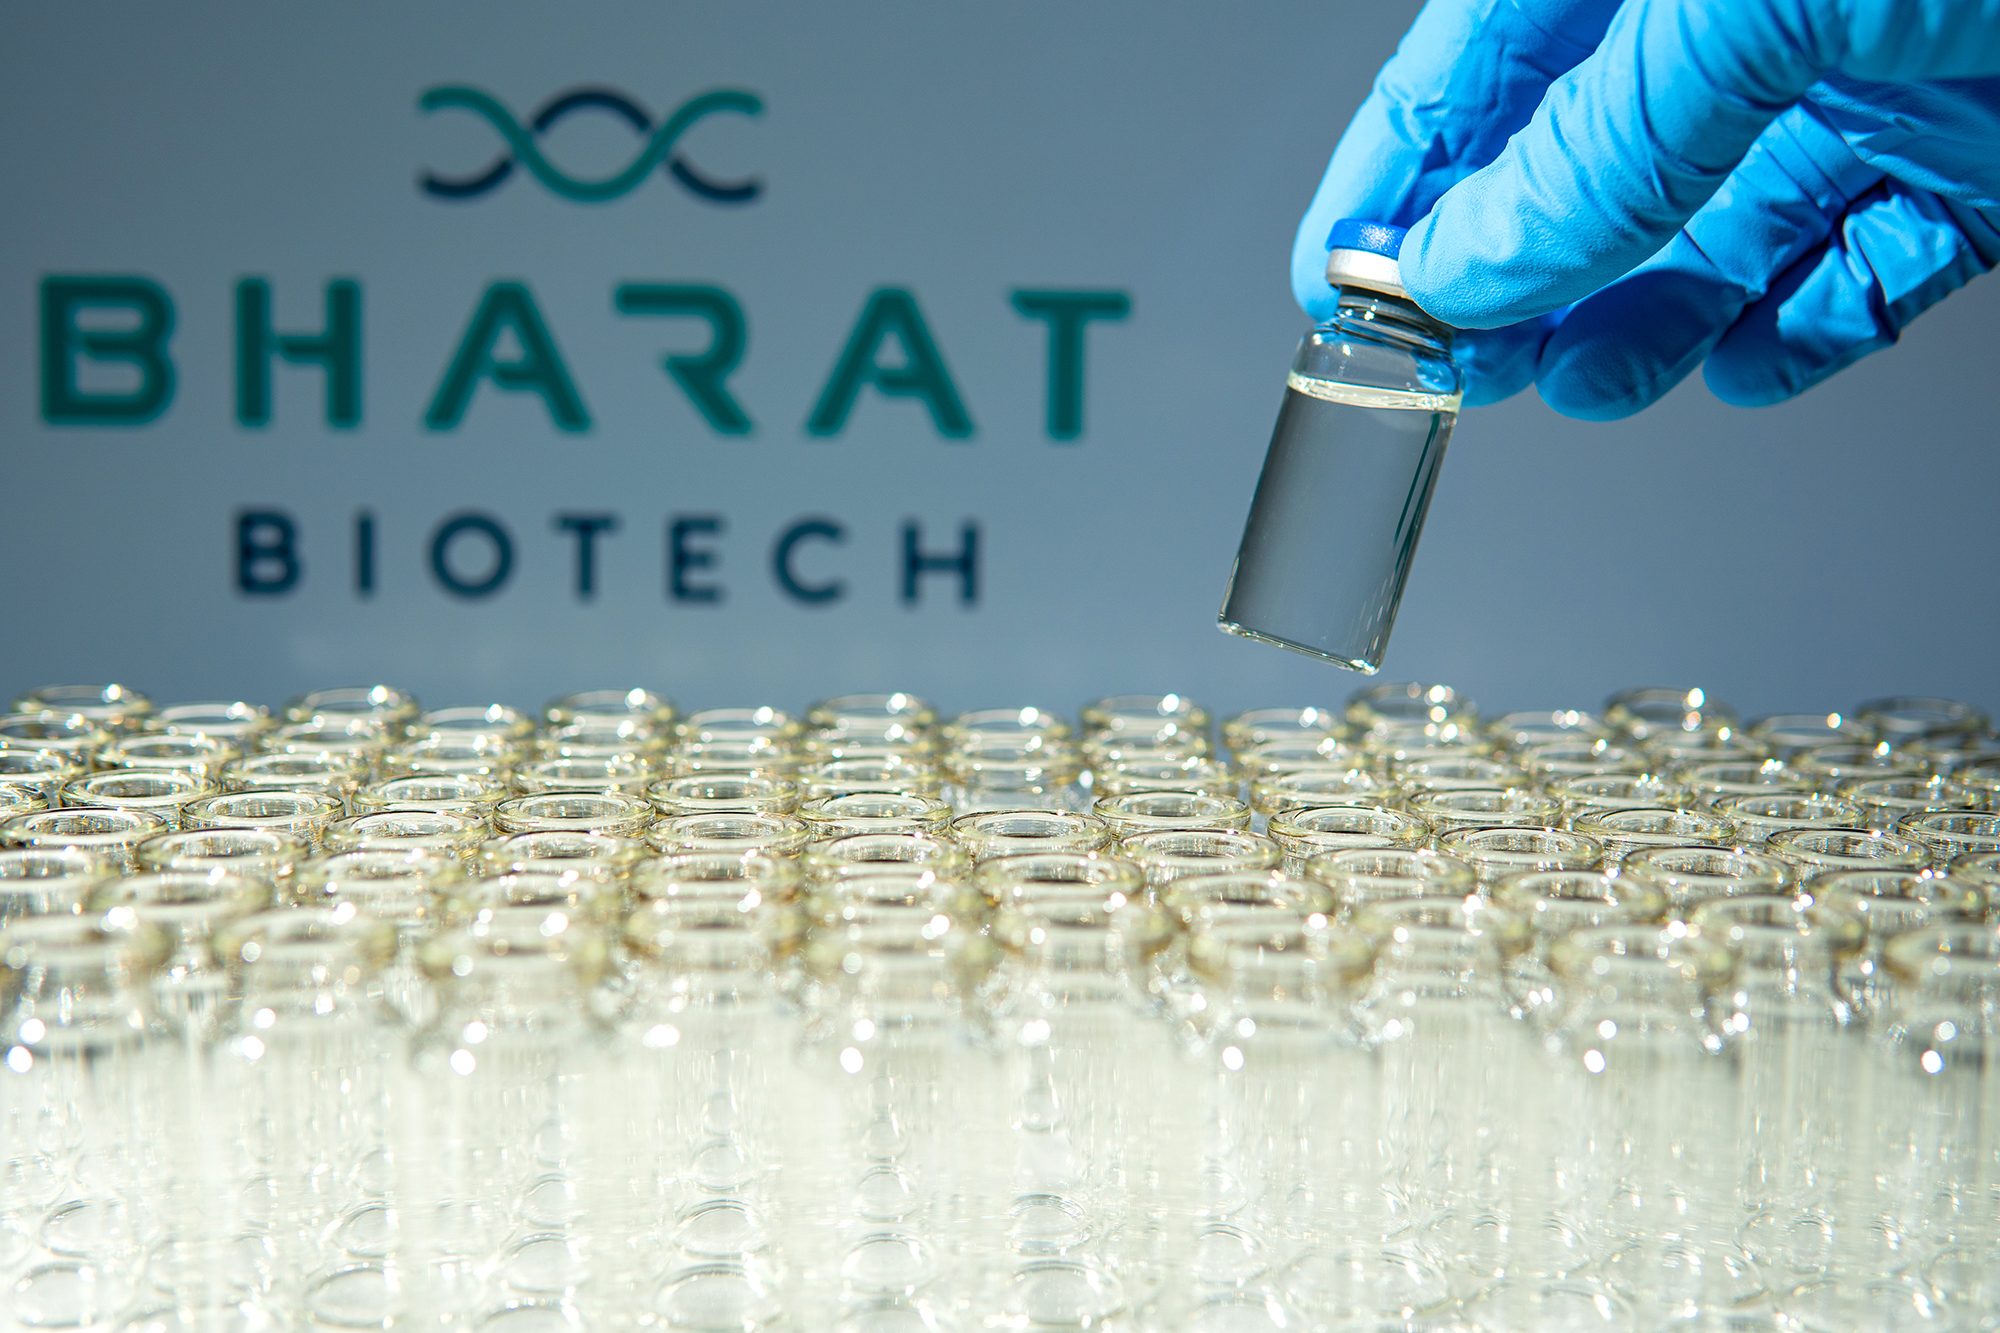 Bharat Biotech gets approval to test nasal COVID-19 shot as booster – report